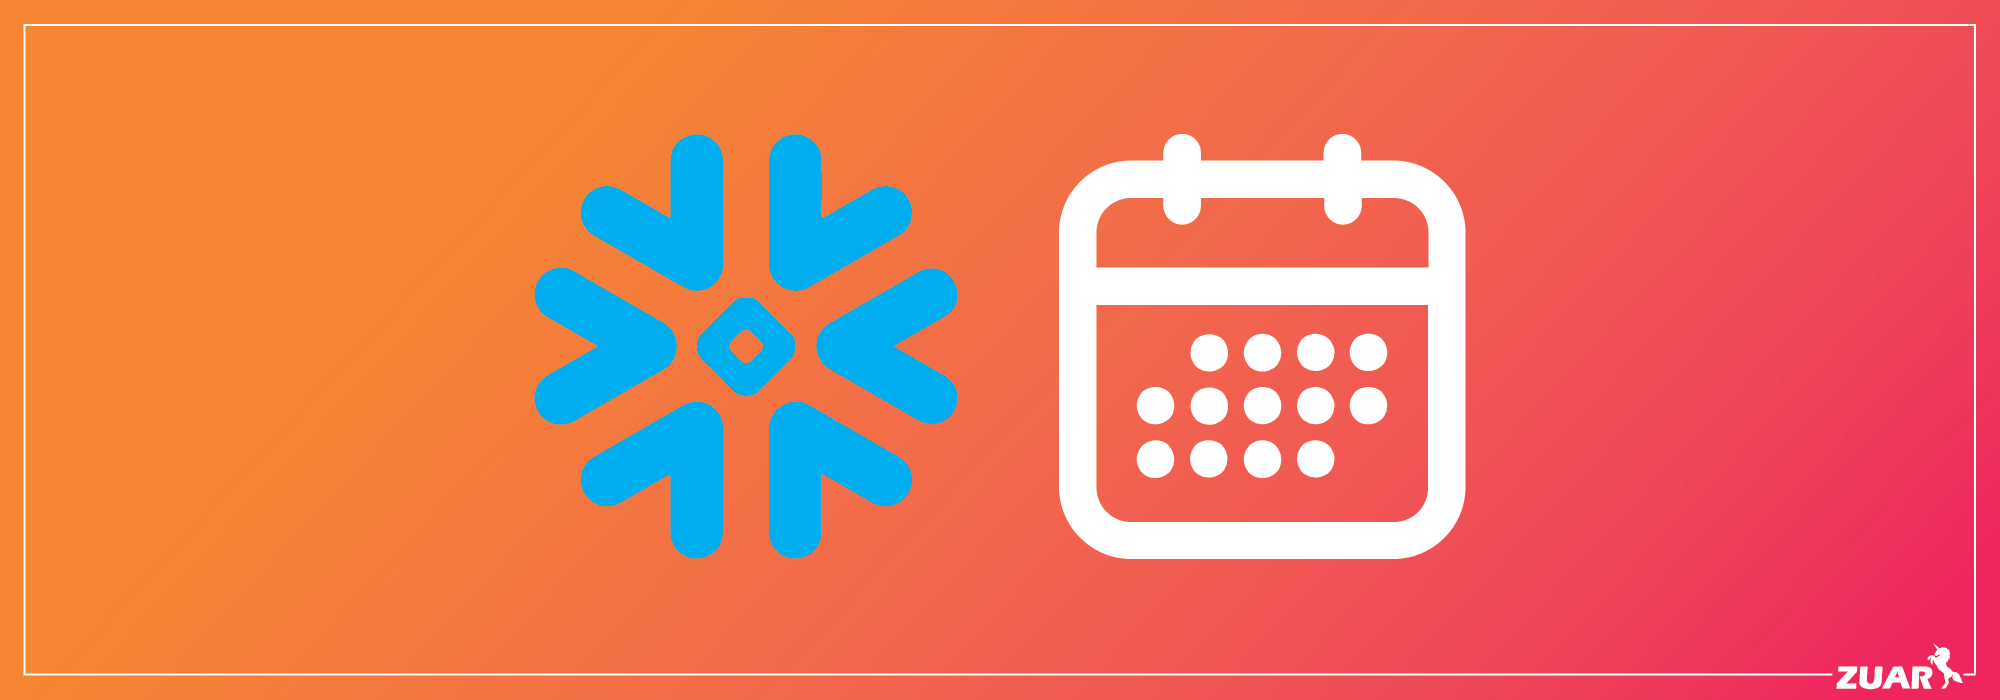 SNOWFLAKE HOW TO: Create Date Dimensions Table, Calendar Table, Date Scaffold, or Date Spine